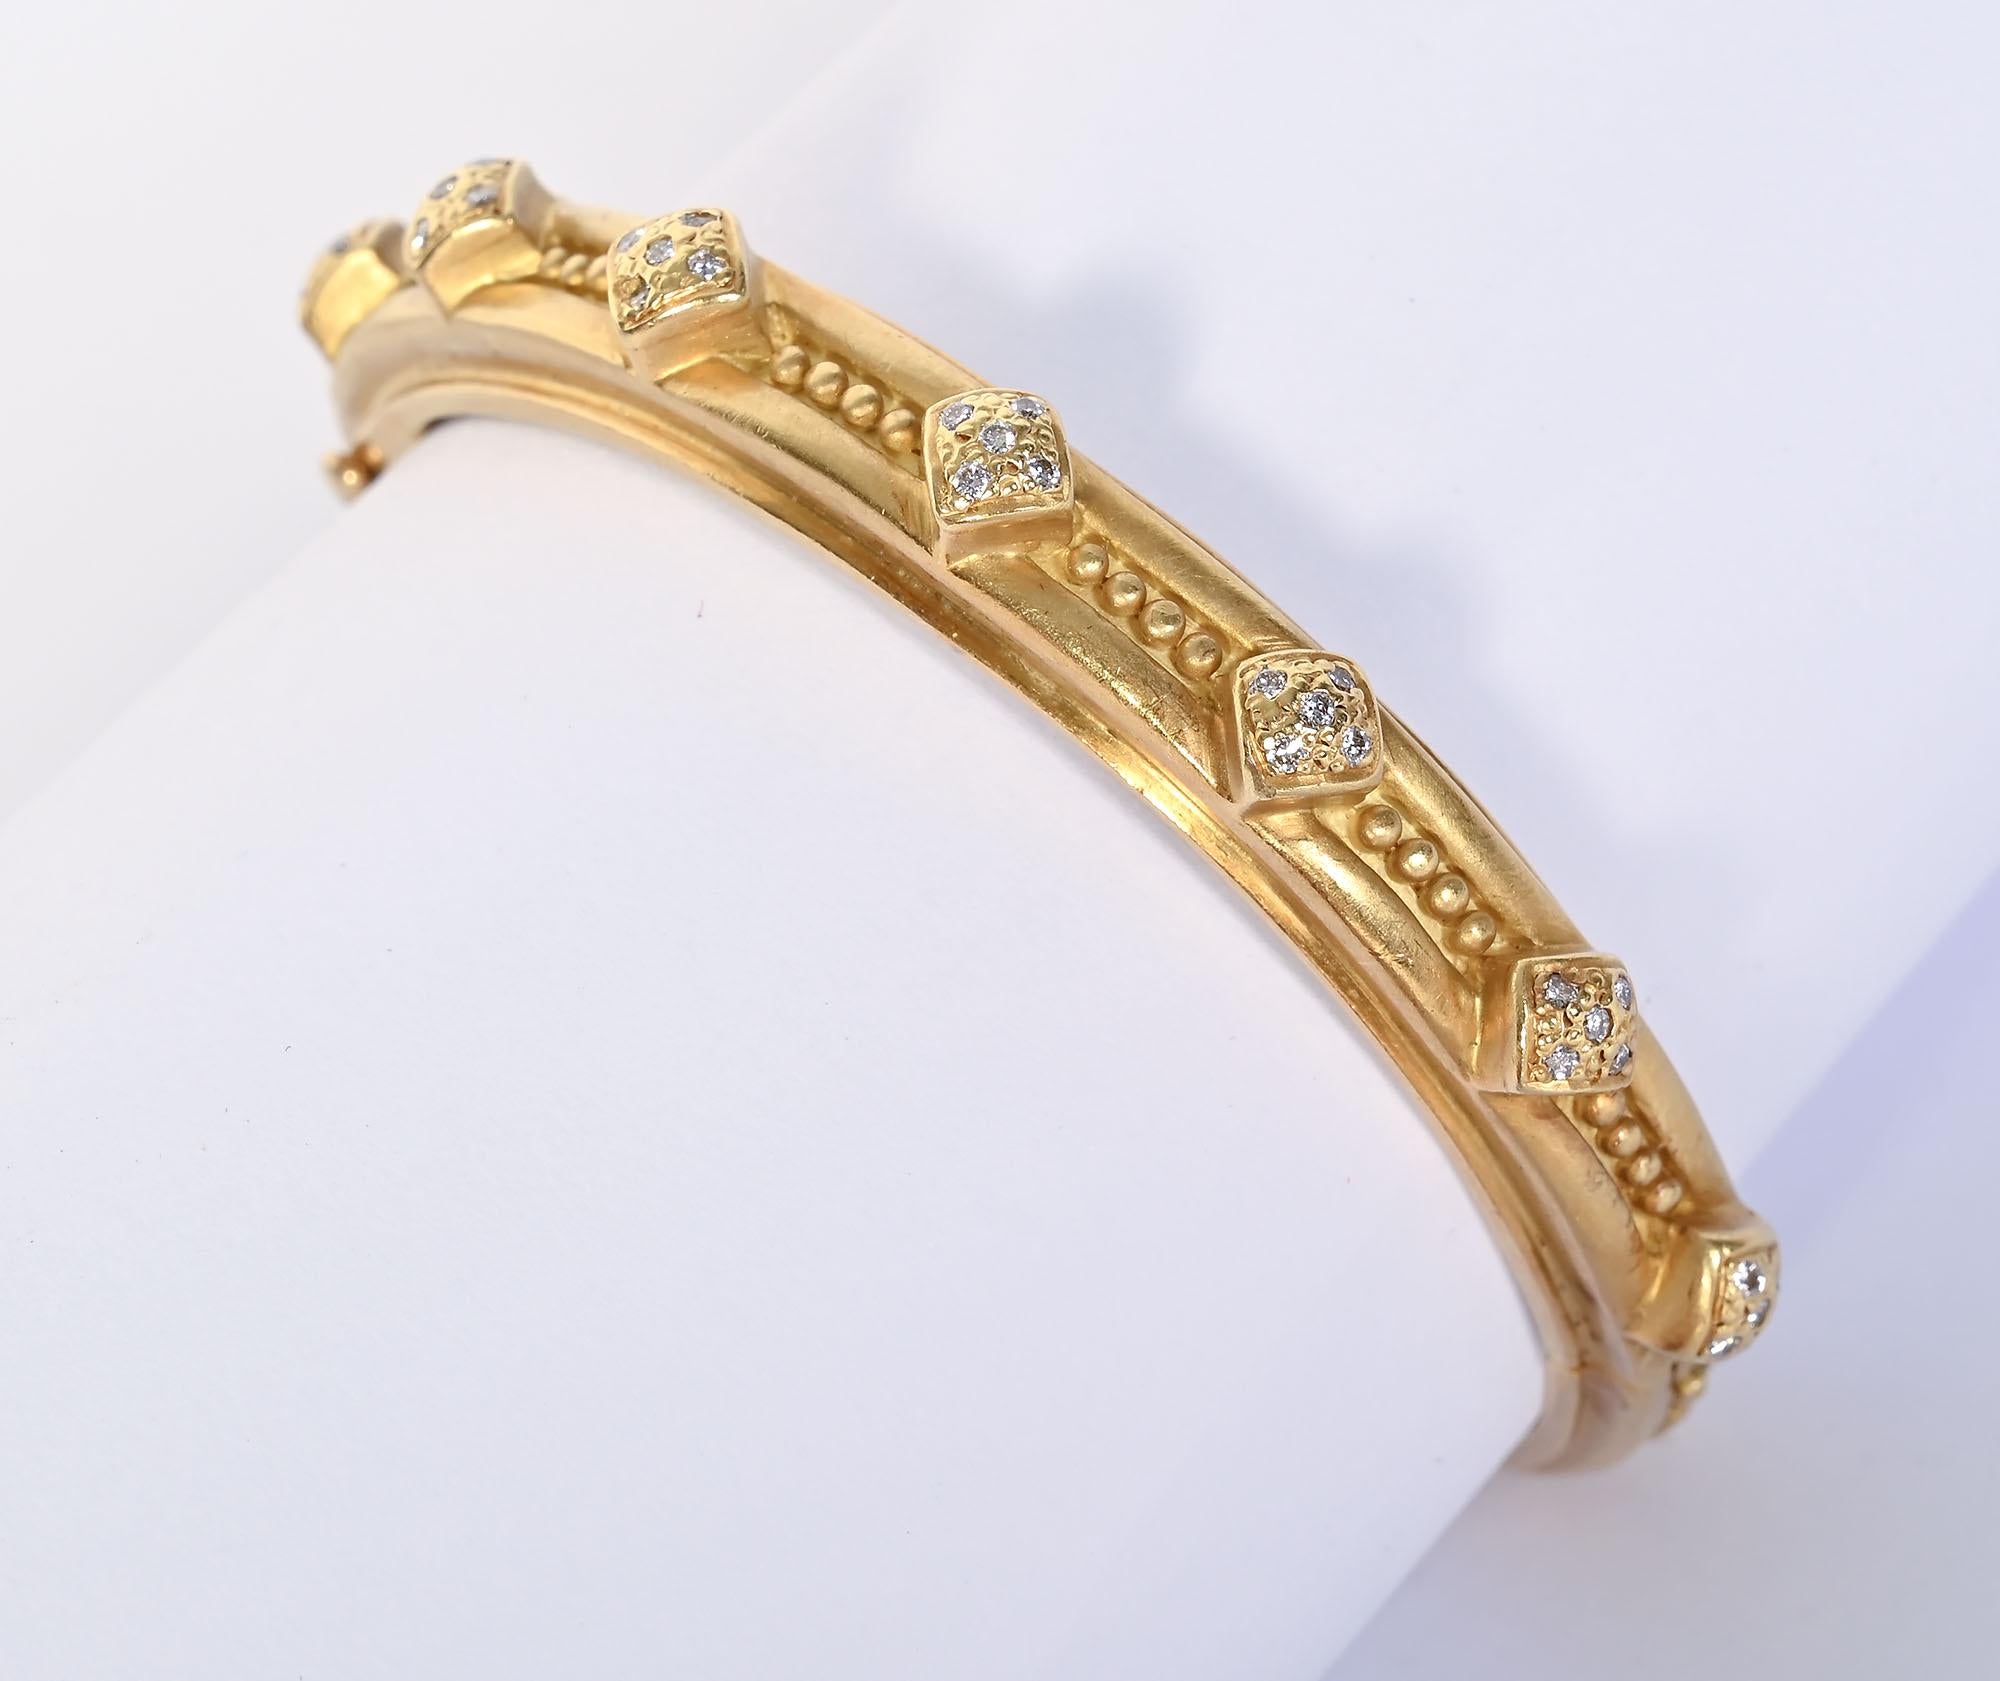 Gold and diamond bangle bracelet by Doris Panos. The bracelet has seven stations of diamonds weighing a total of 35 points. Between the diamond shaped stations and throughout the back are tiny gold balls. The hinged bracelet is 2 3/16 in interior